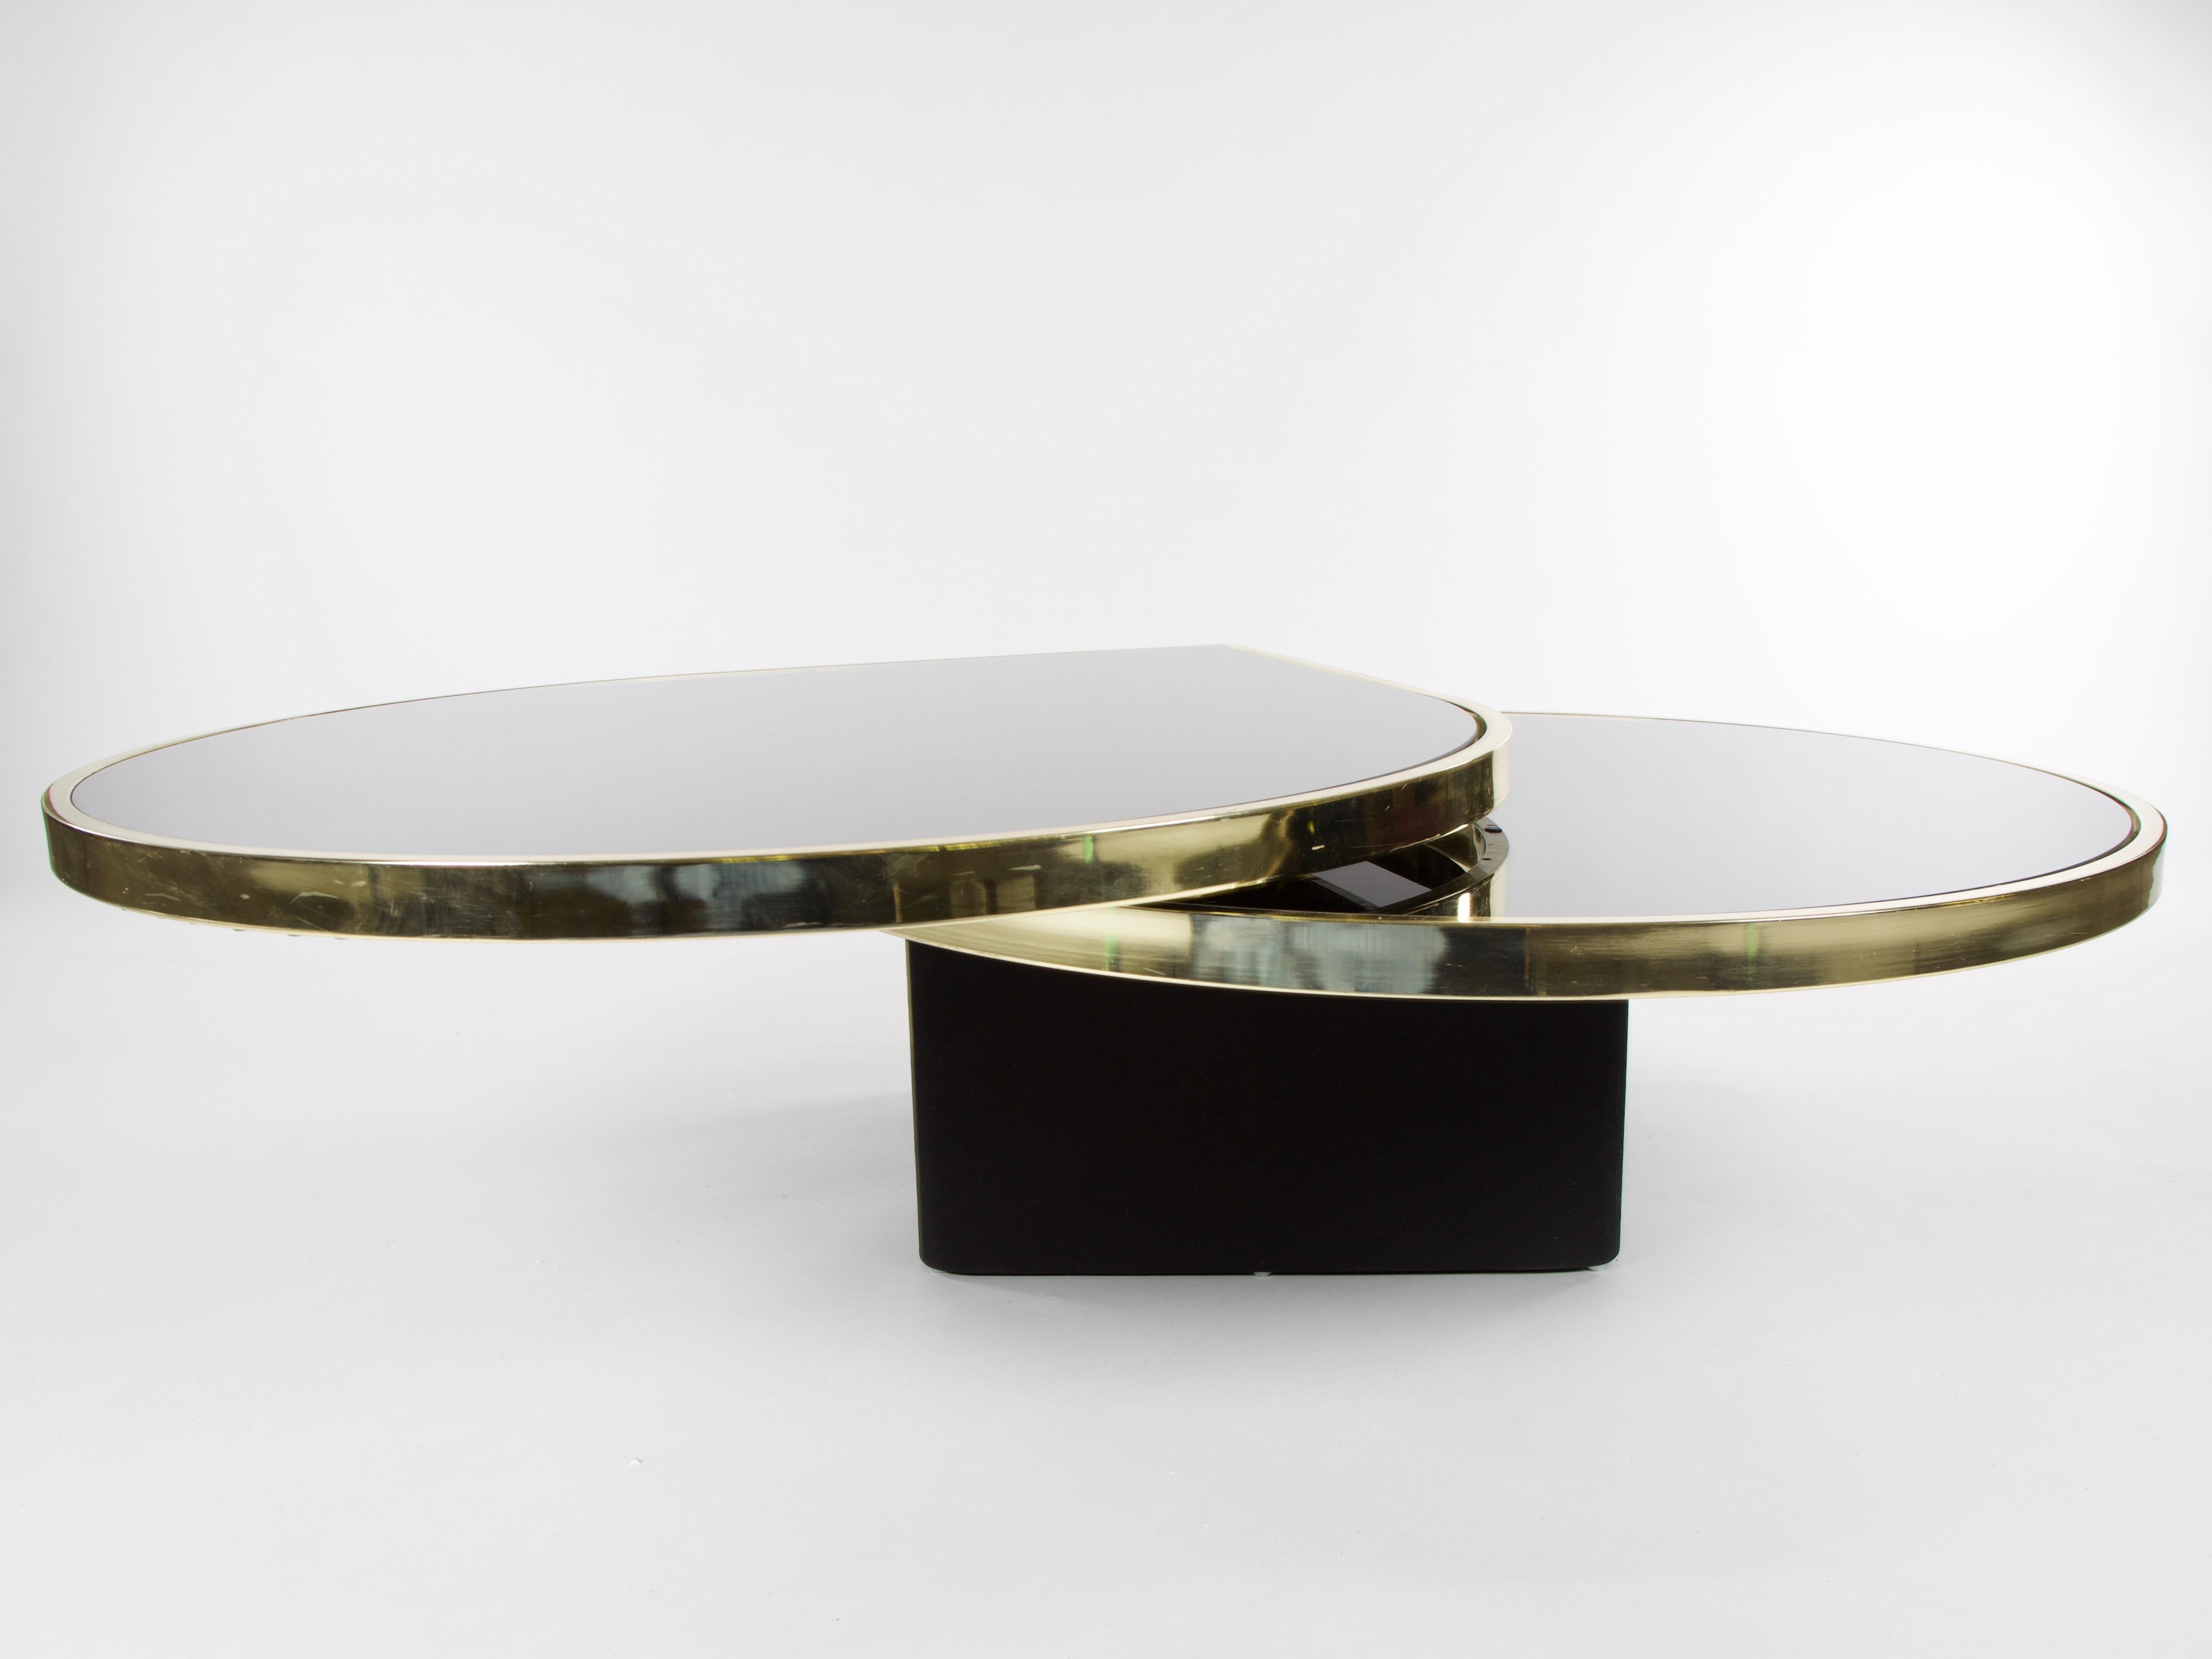 Black glass and brass teardrop swivel cocktail table by DIA, signed
 
Signed (Design Institute American, Inc. 1983, DIA 48447). Attributed to Rougier for The Design Institute of America (DIA) modernist teardrop rotating cocktail table. The table